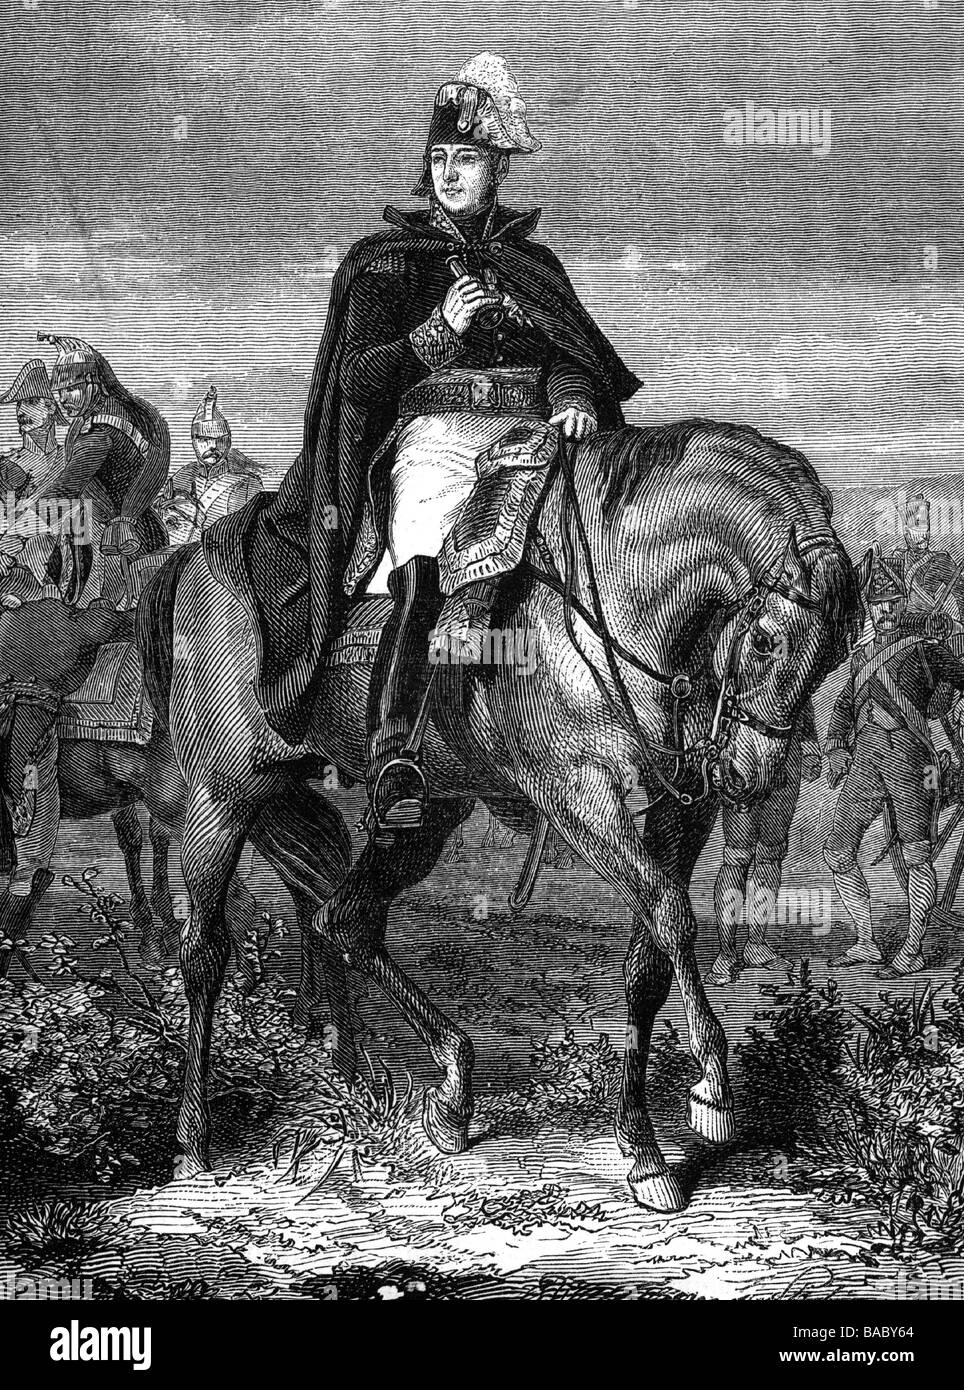 Mortier, Edouard Adolphe, 12.21768 - 28.7.1835, Fench general, equestrian image, wood engraving, 19th century, , Stock Photo